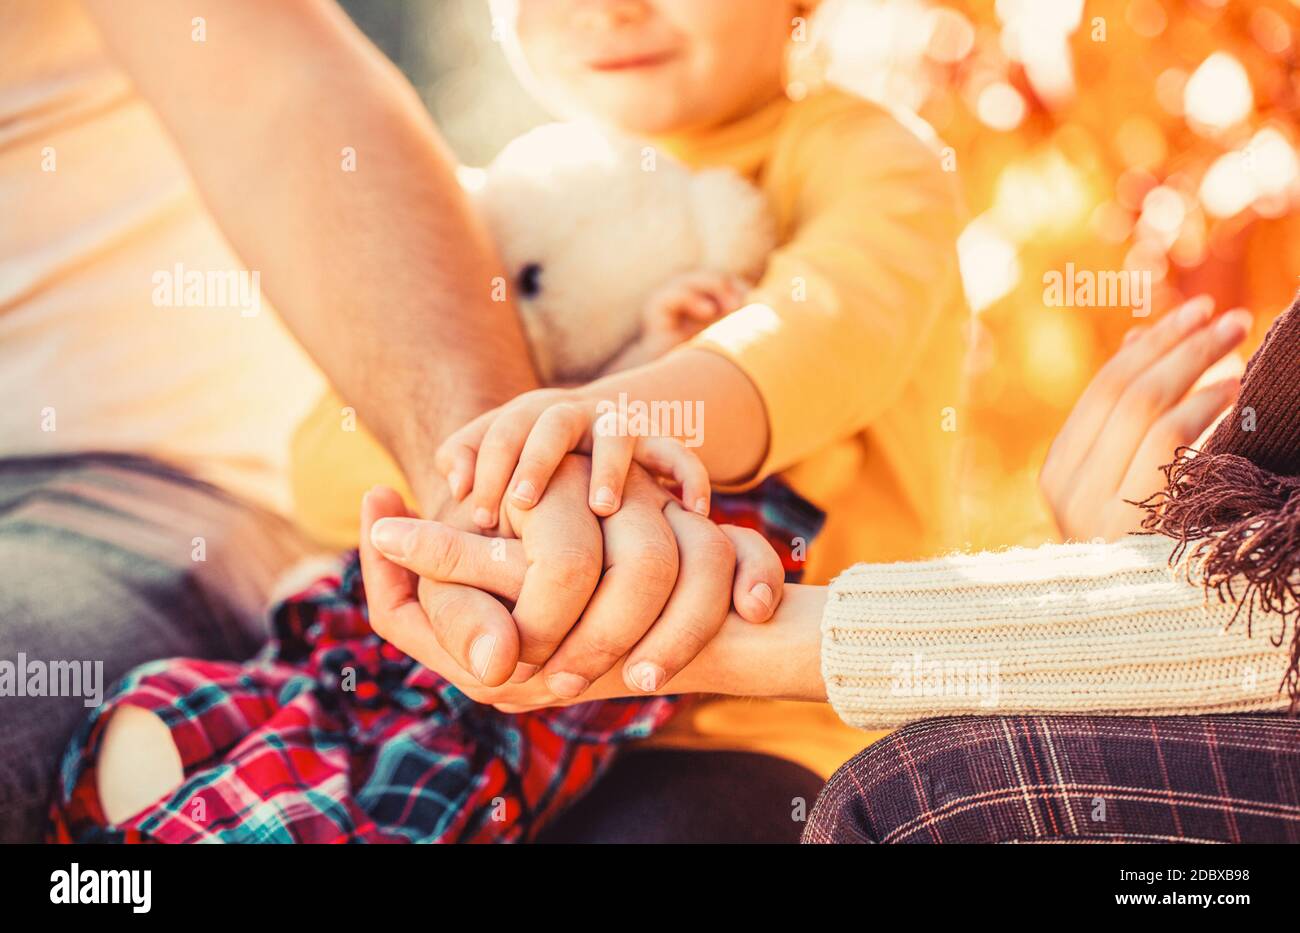 Hands of father, mother, keep hand little baby. Parents hold the baby hands. Closeup of baby hand into parents hands Stock Photo